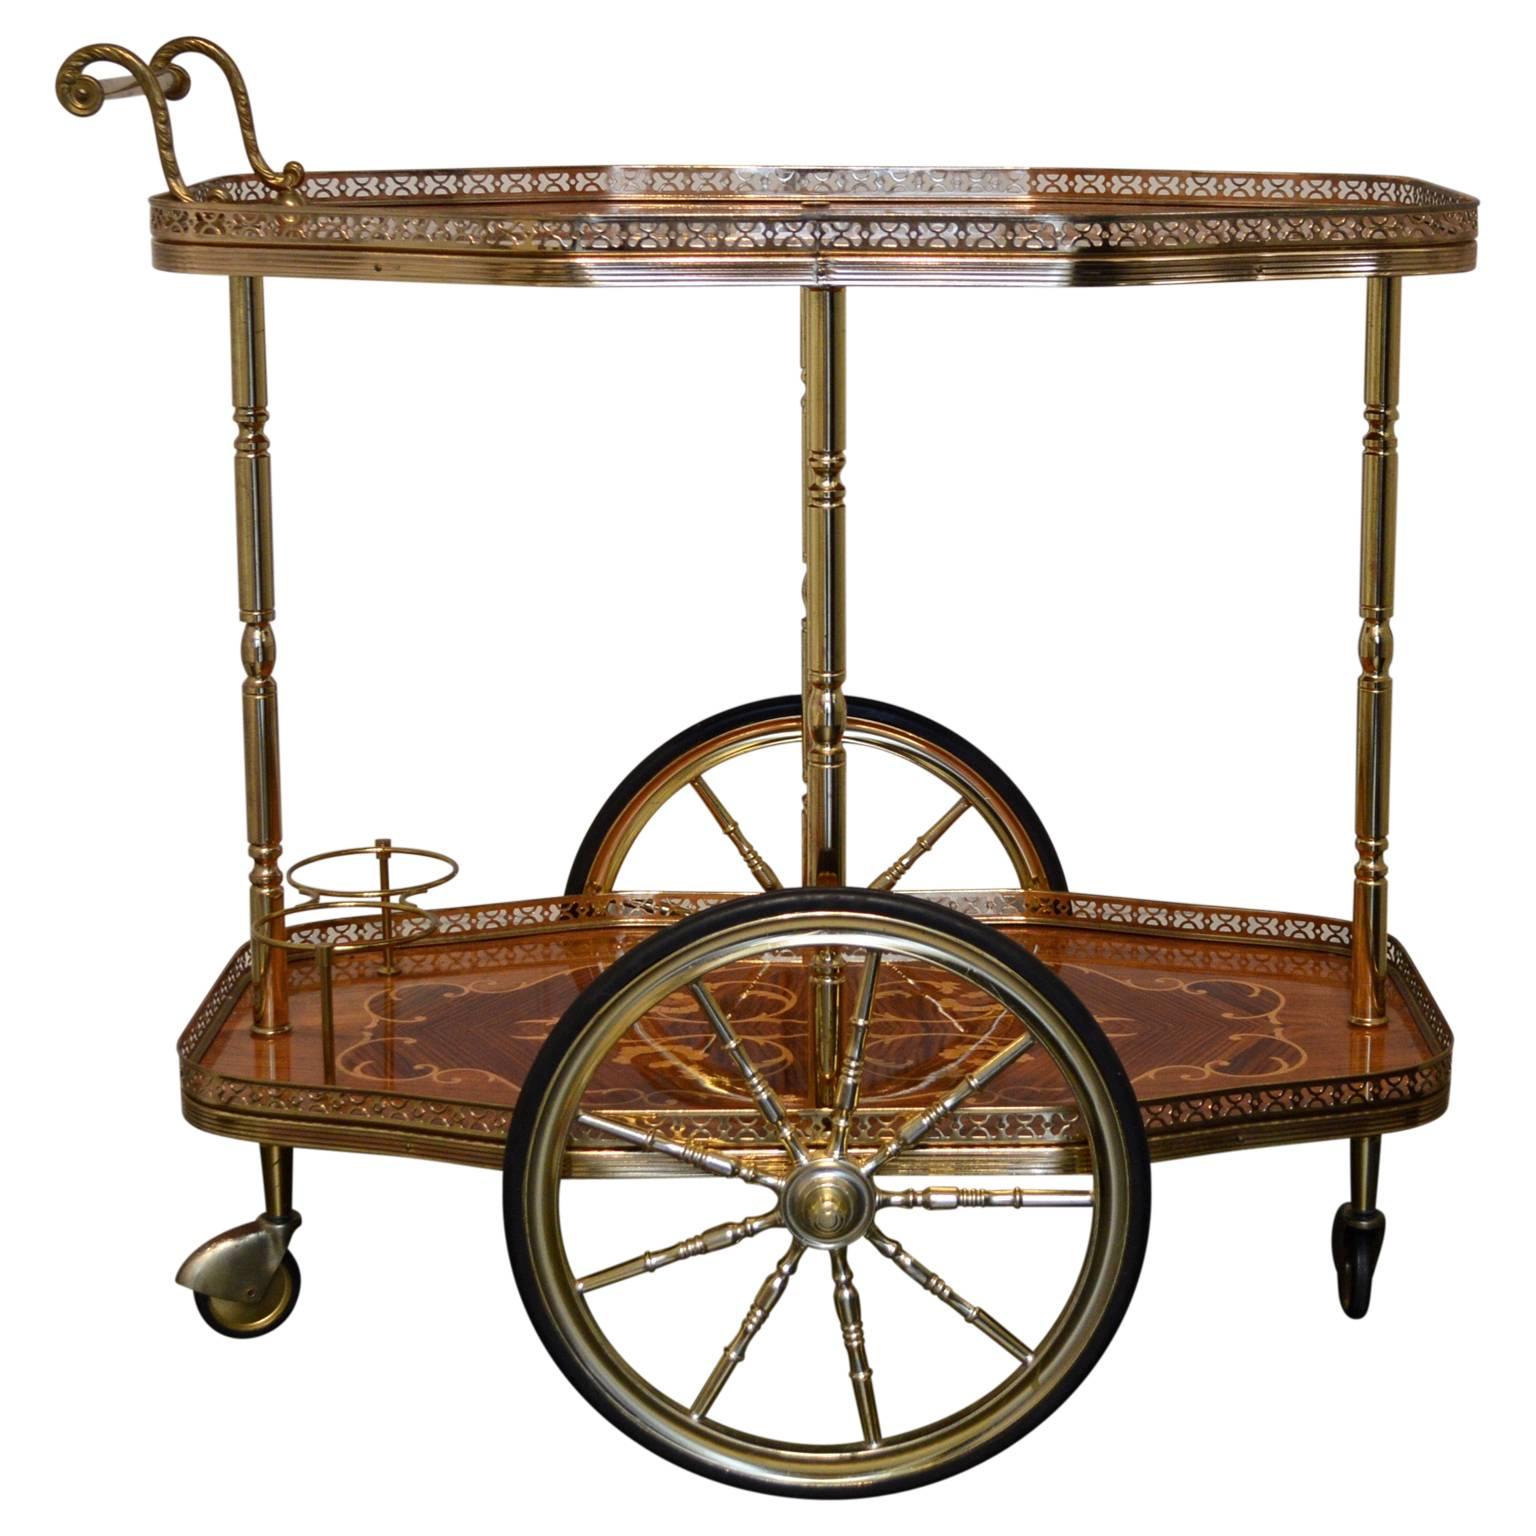 An elegant midcentury Italian serving or bar cart with marquetry decoration and brass trim.

High gloss ribbon mahogany veneer inlaid with a beautifully rendered floral display of blond wood marquetry. Levels joined by brass columns, and handle is